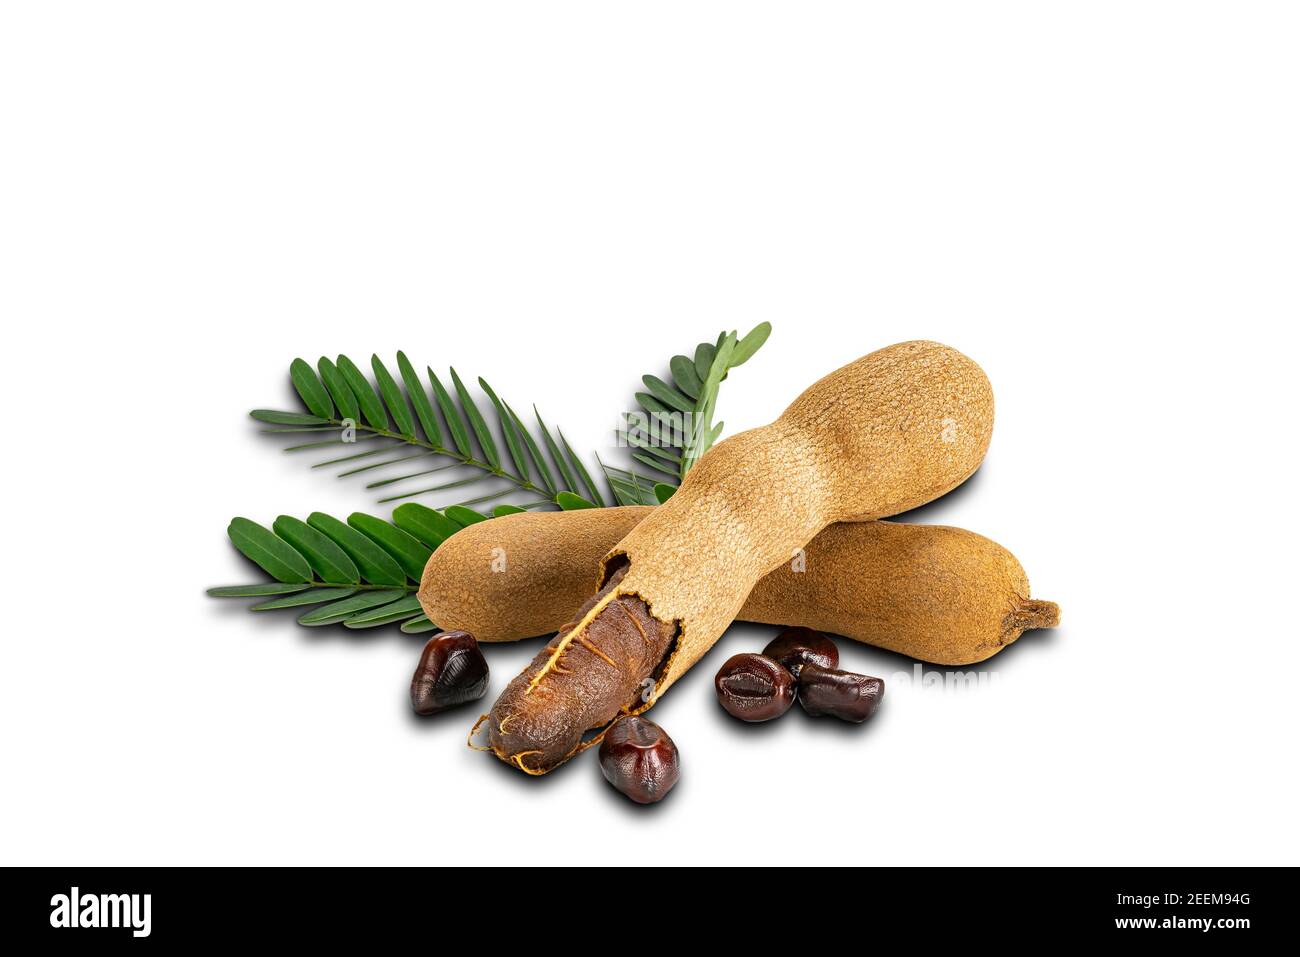 Tamarind with leaves and seeds on white background with clipping path. Ripe tamarind peel shell and hard dark seeds. Stock Photo